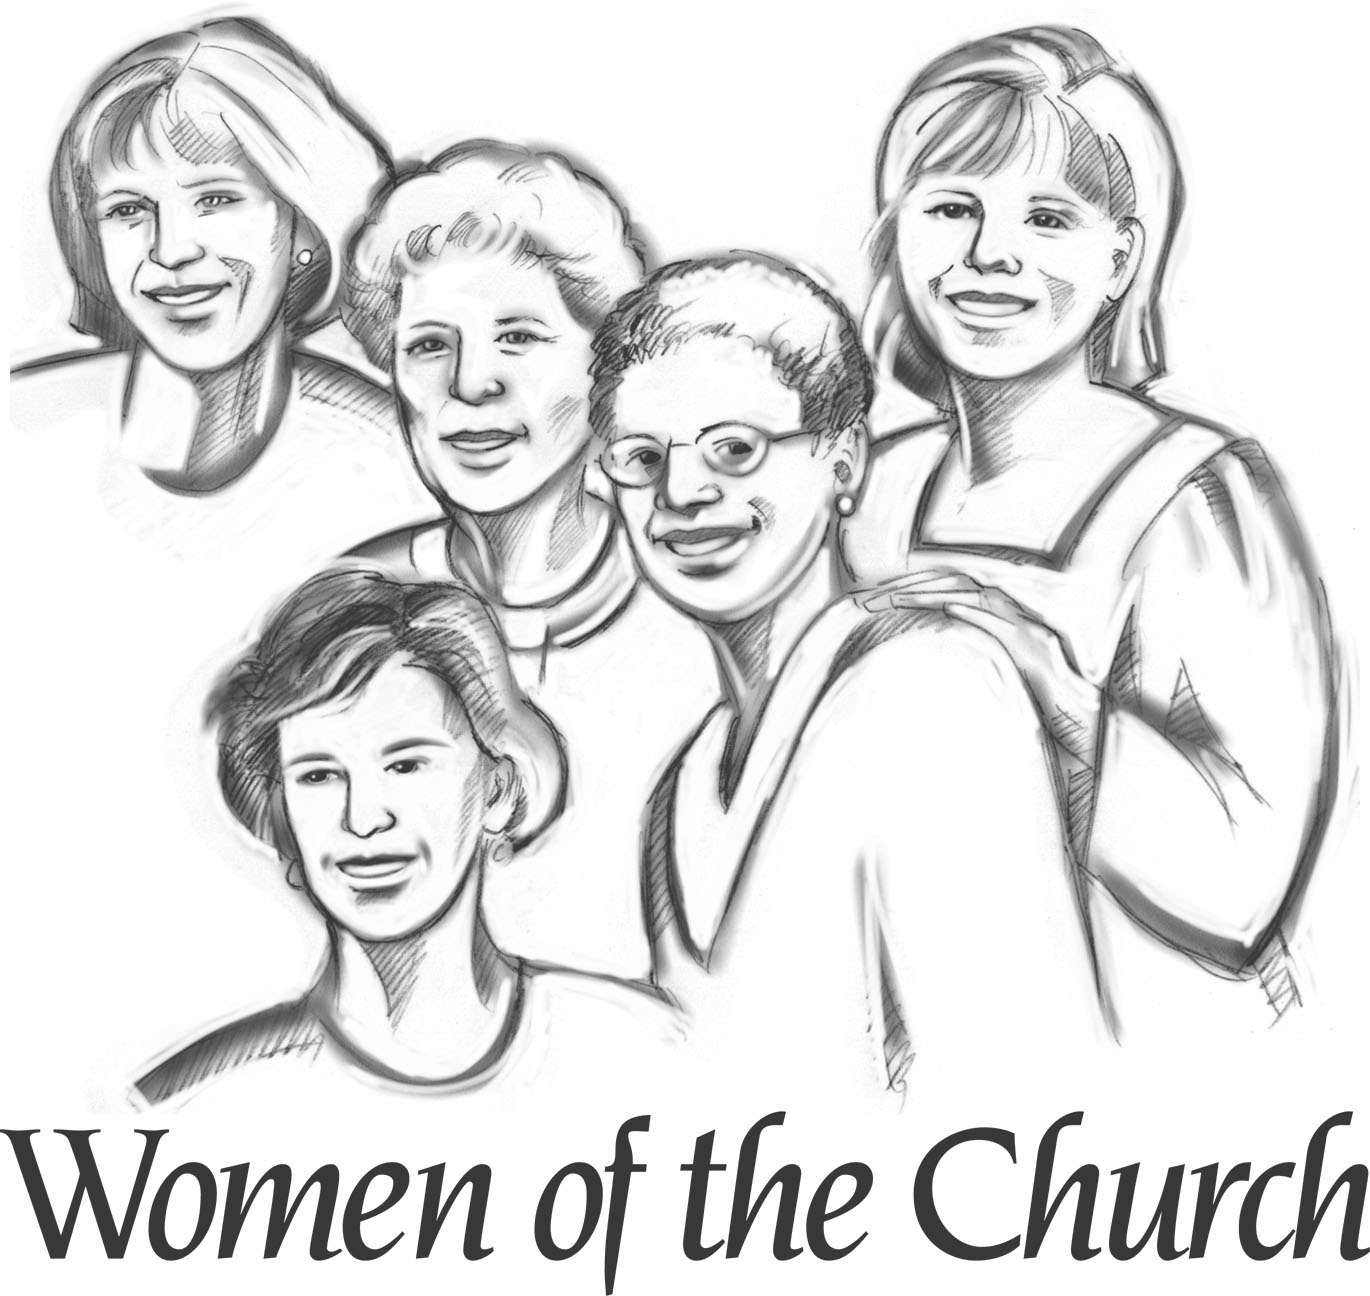 Together And The Words Women Of The Church Across The Bottom